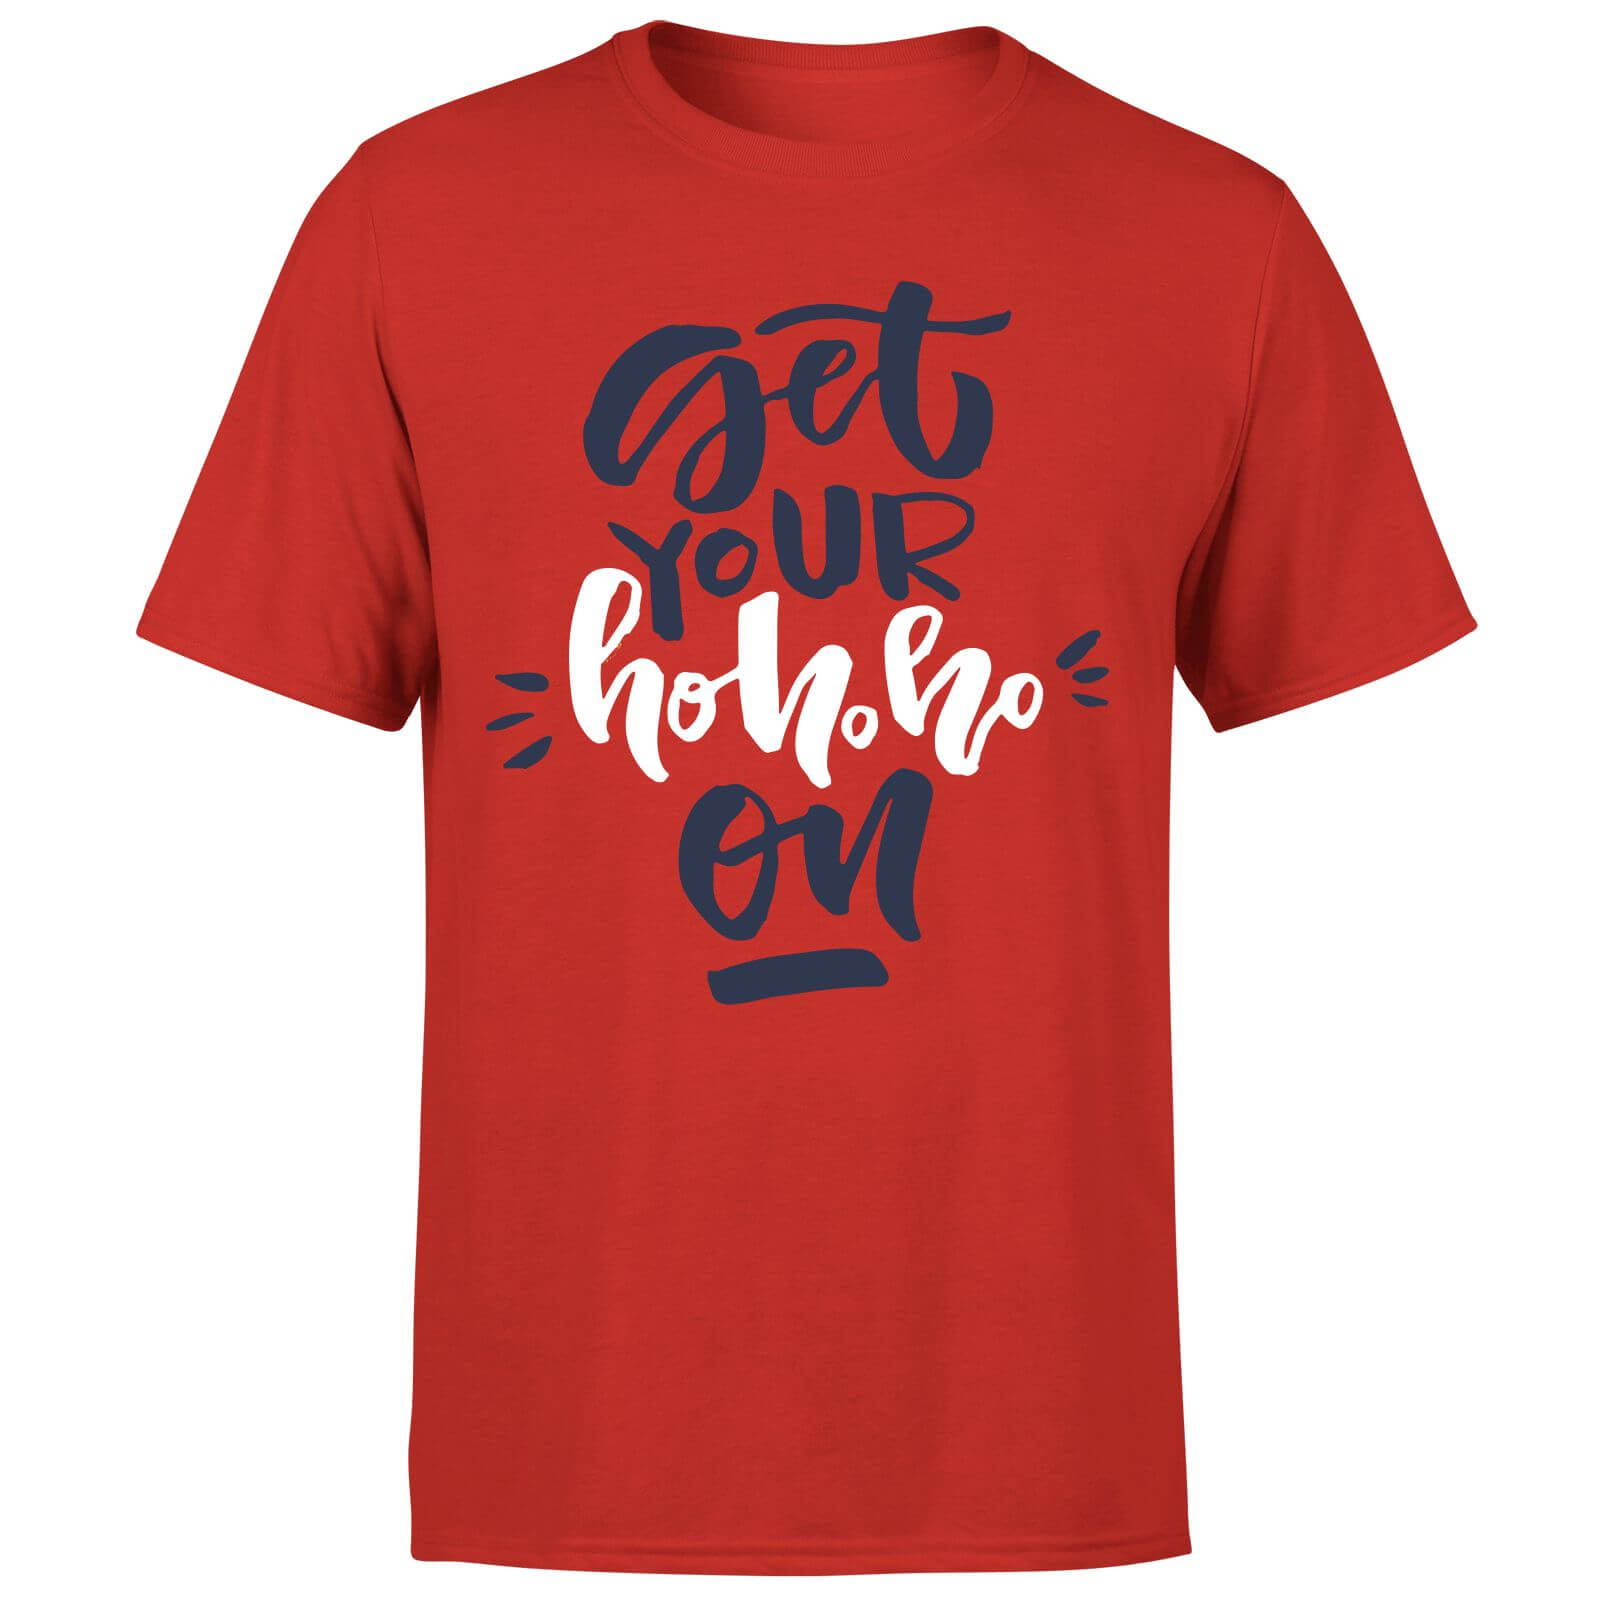 Get your Ho Ho Ho On T-Shirt - Red - S - Red